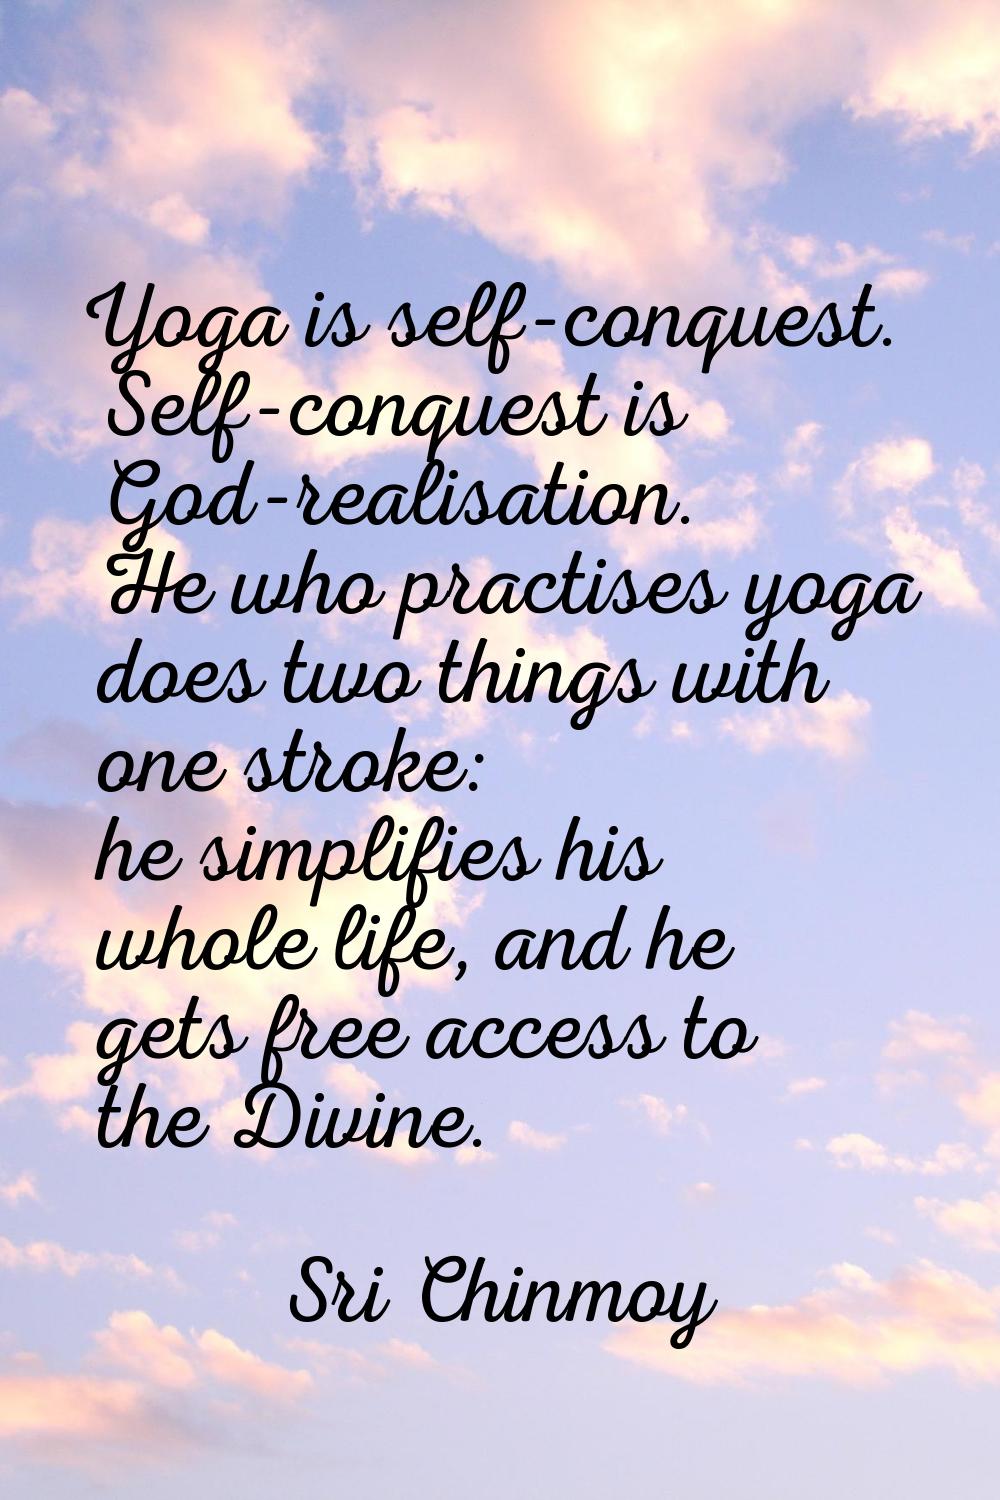 Yoga is self-conquest. Self-conquest is God-realisation. He who practises yoga does two things with